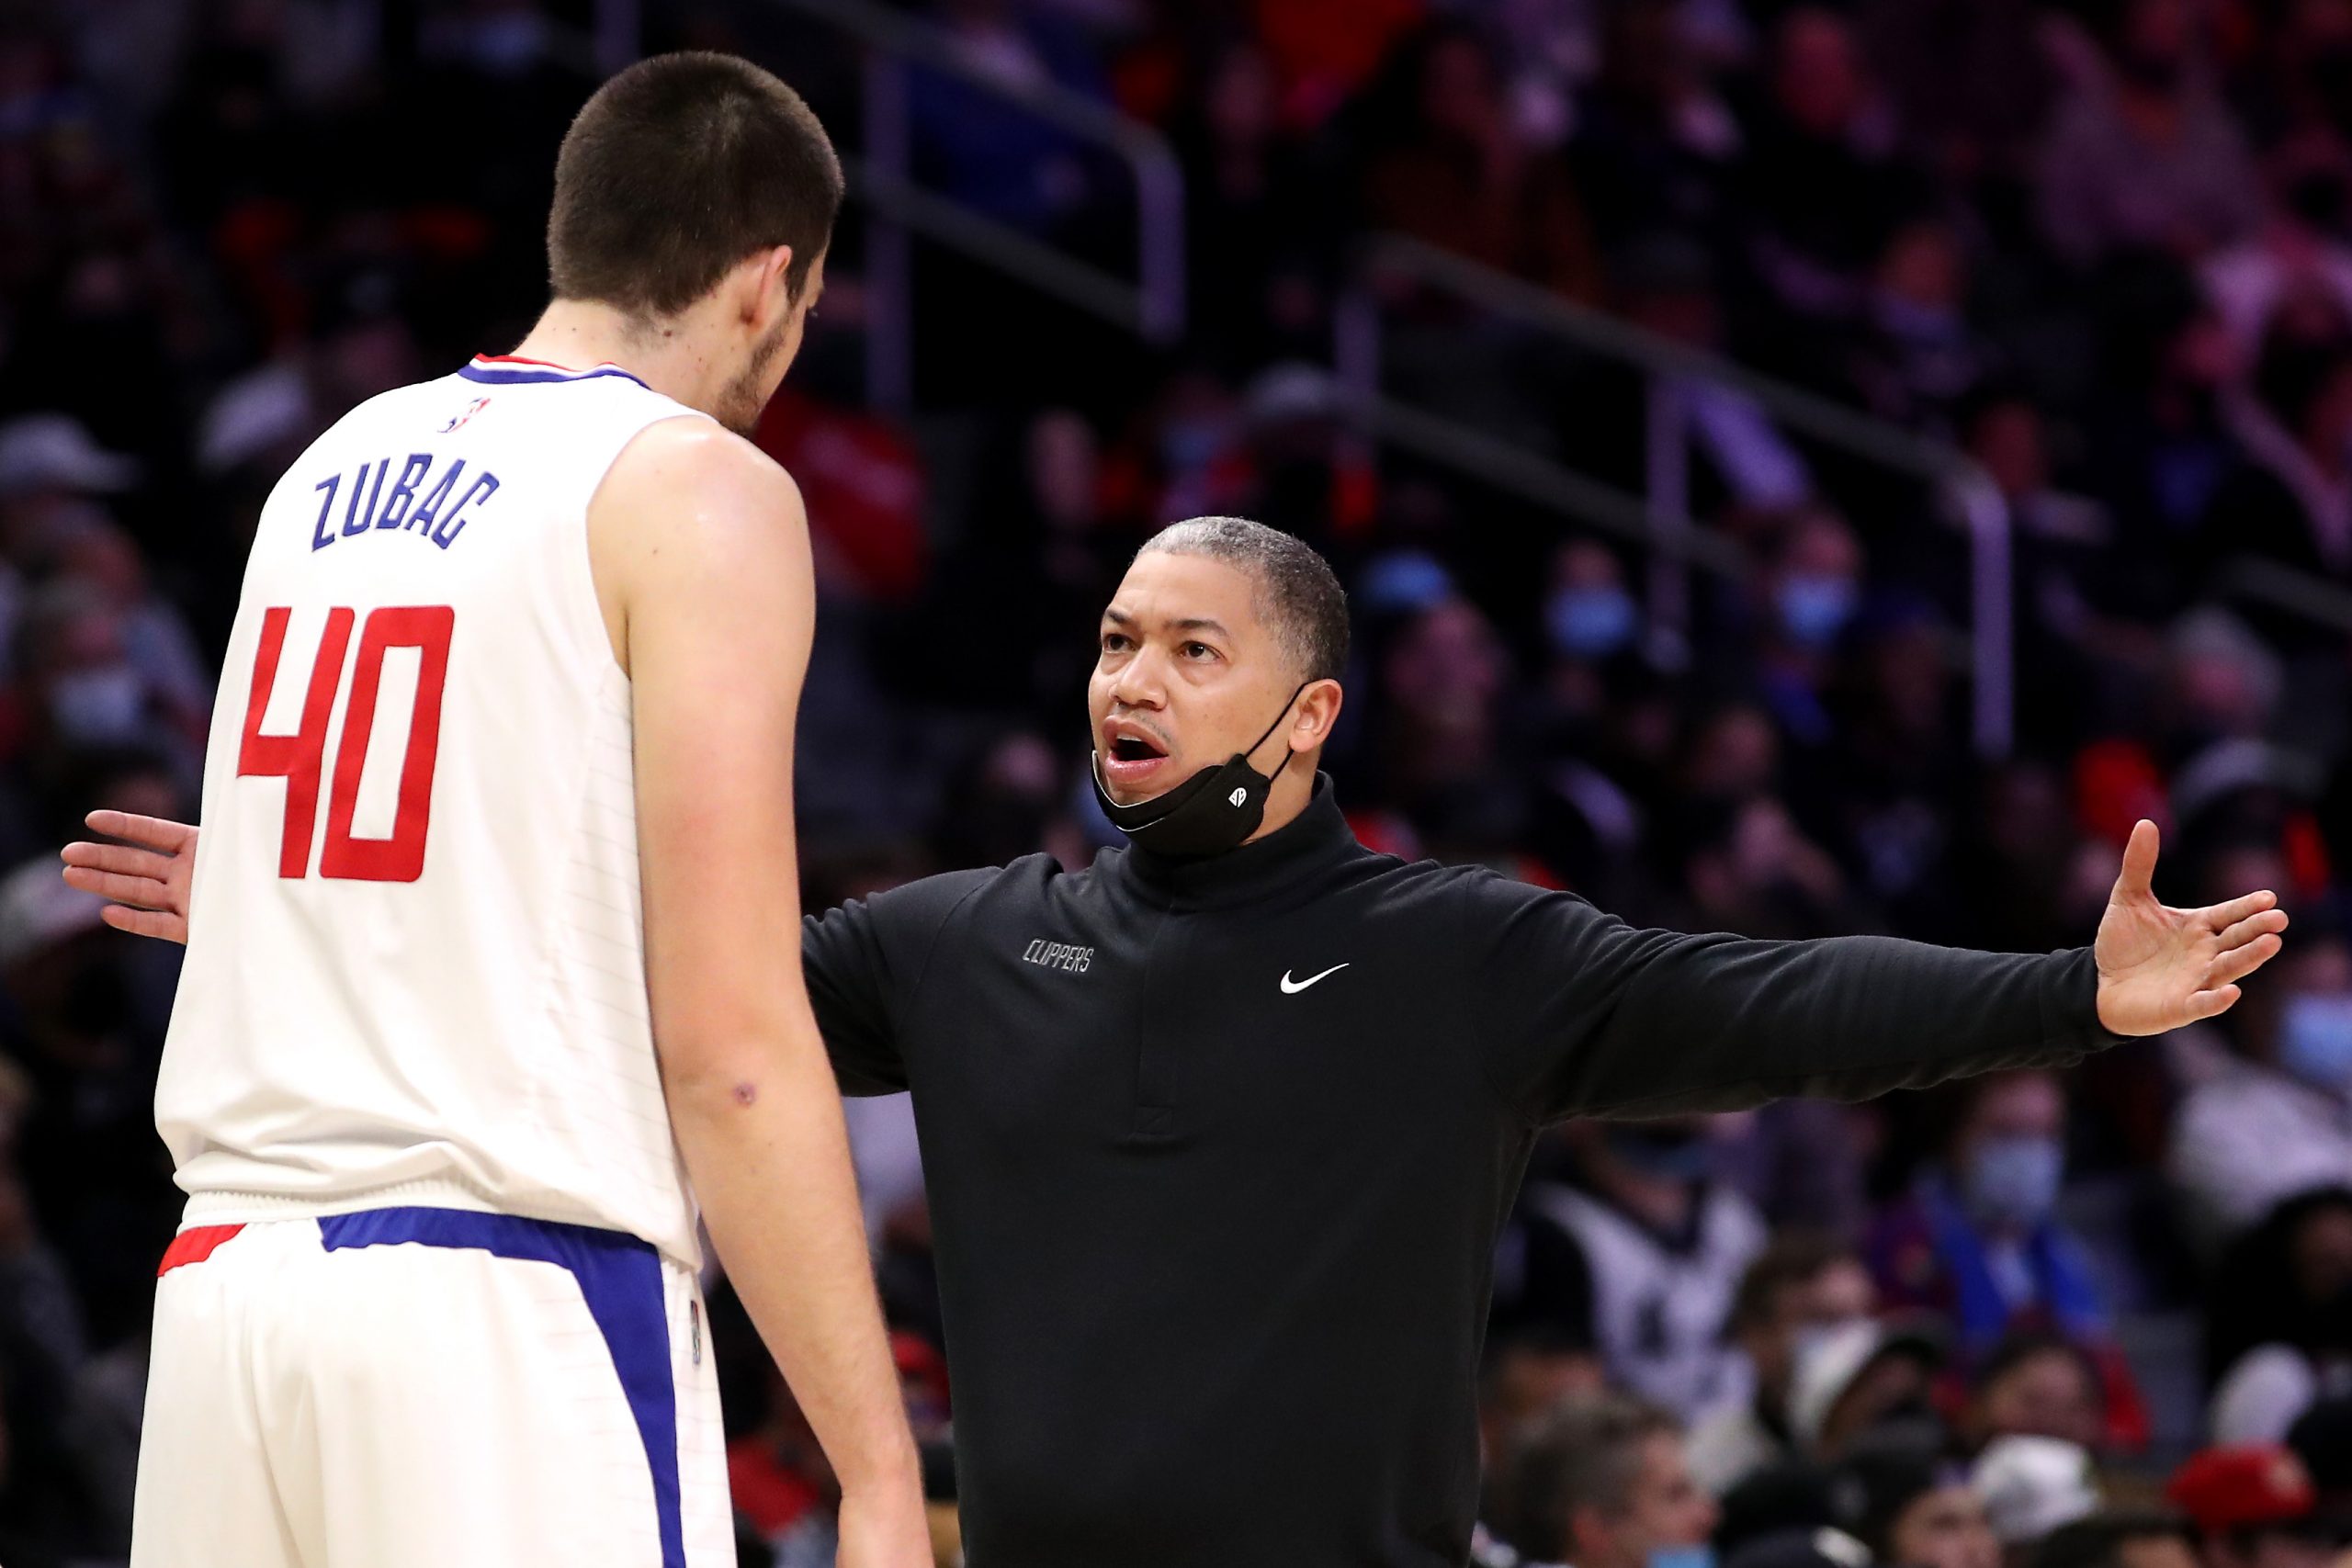 Los Angeles Clippers coach Tyronn Lue discusses strategy with center Ivica Zubac during a recent game against the Denver Nuggets.